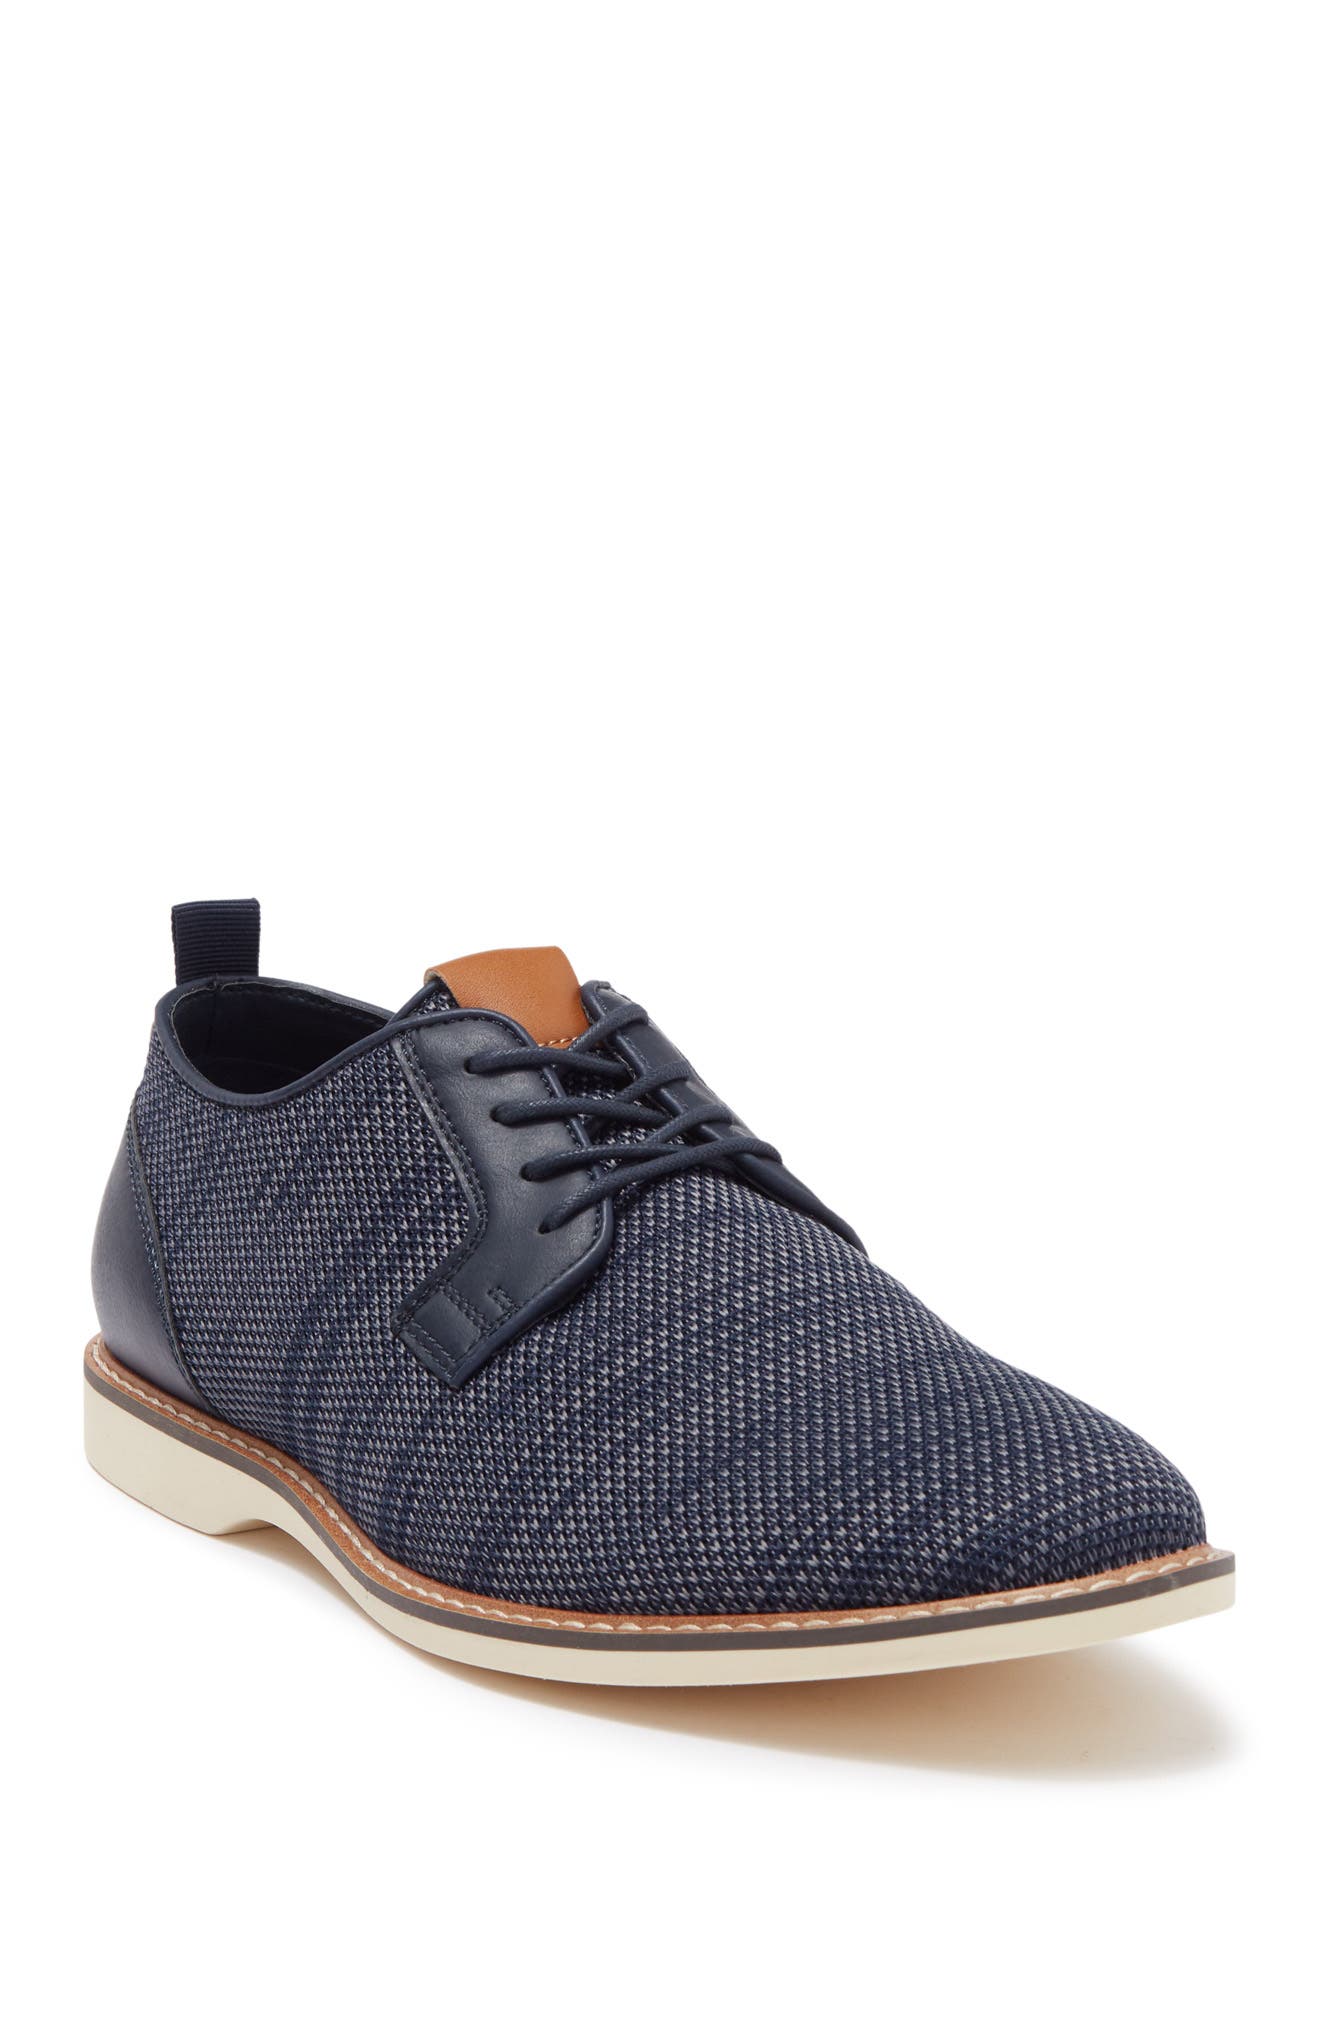 Abound Sheridan Knit Lace-up Derby In Navy